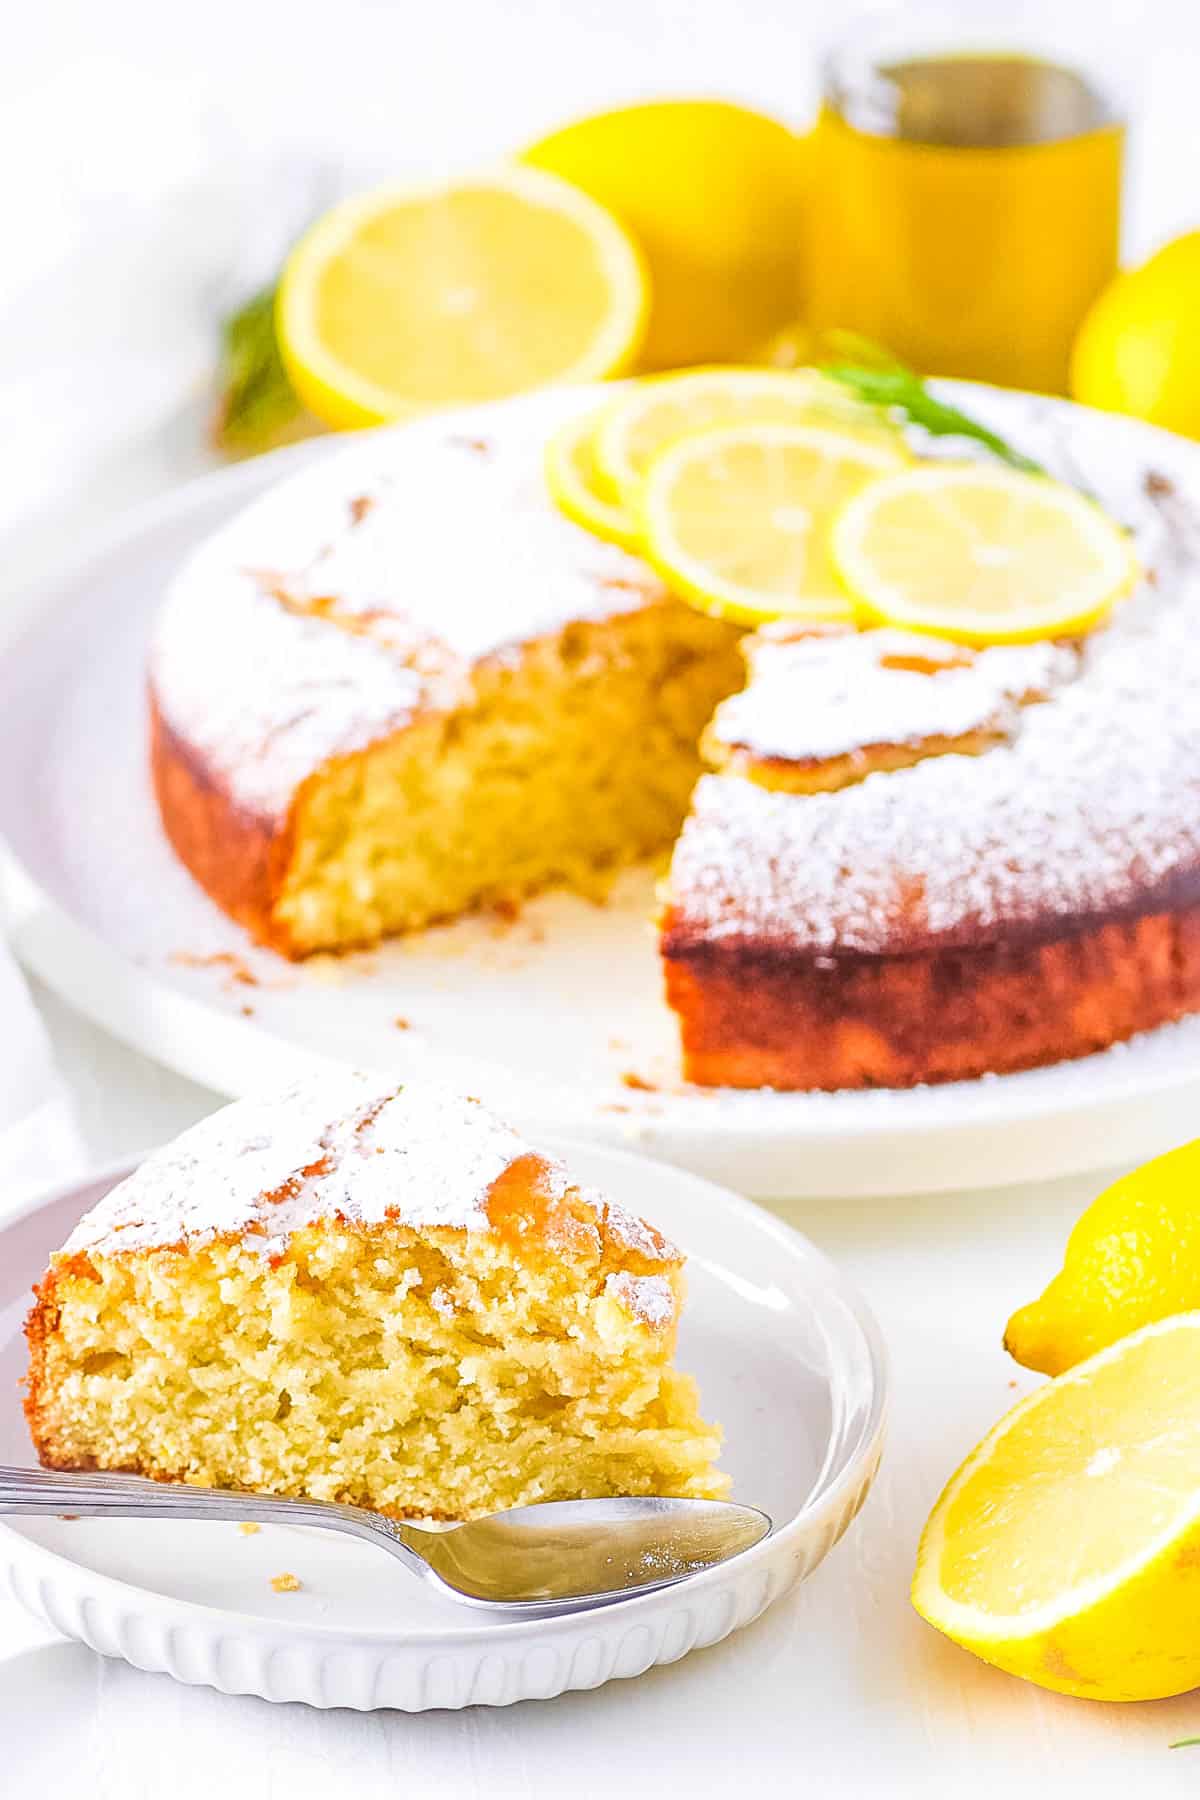 Lemon vegan olive oil cake on a cake stand with a piece cut out and served on a plate.